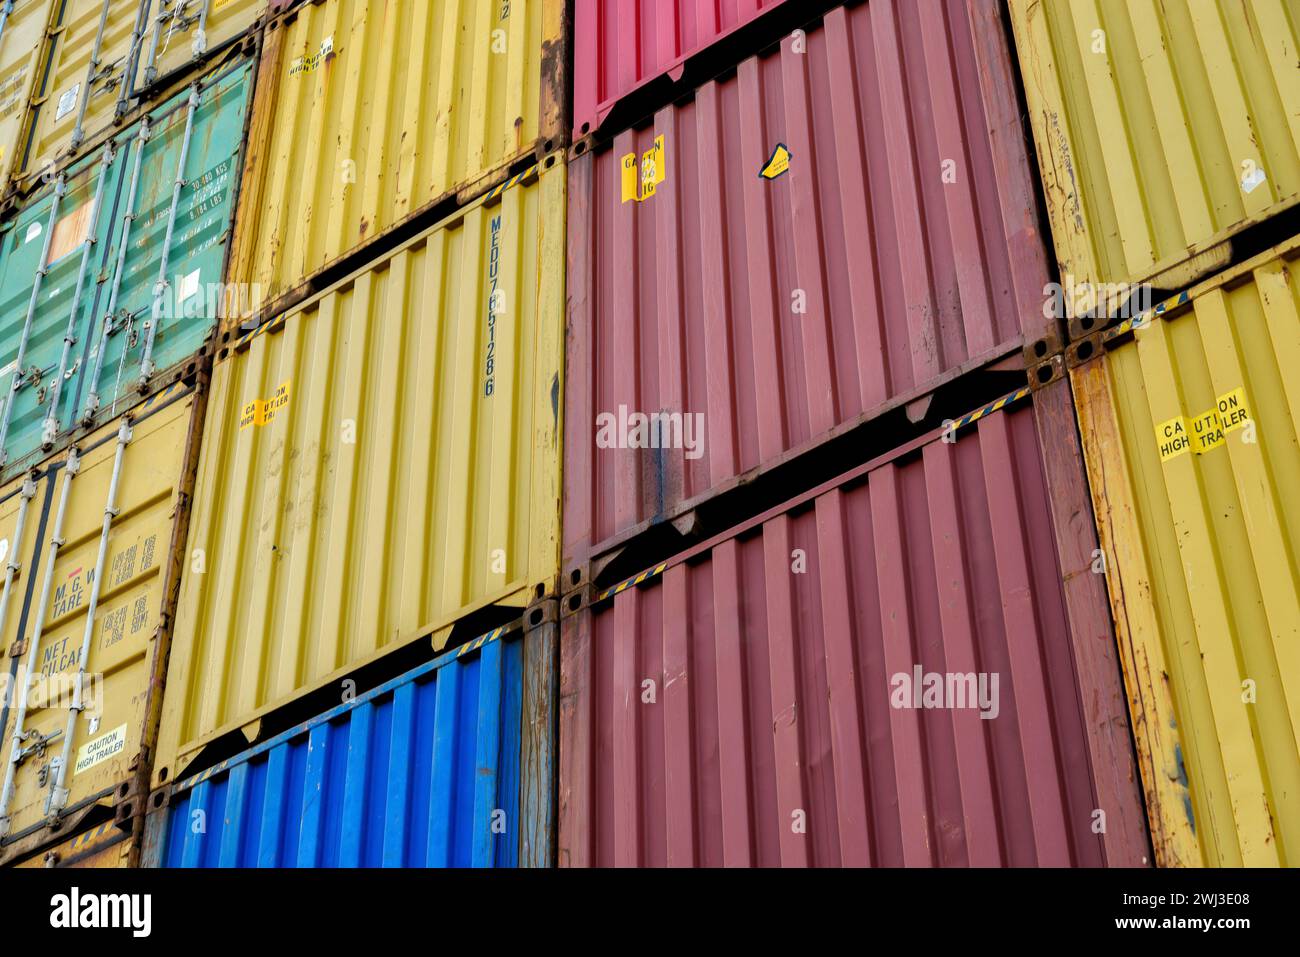 Standard shipping containers in a container terminal Stock Photo